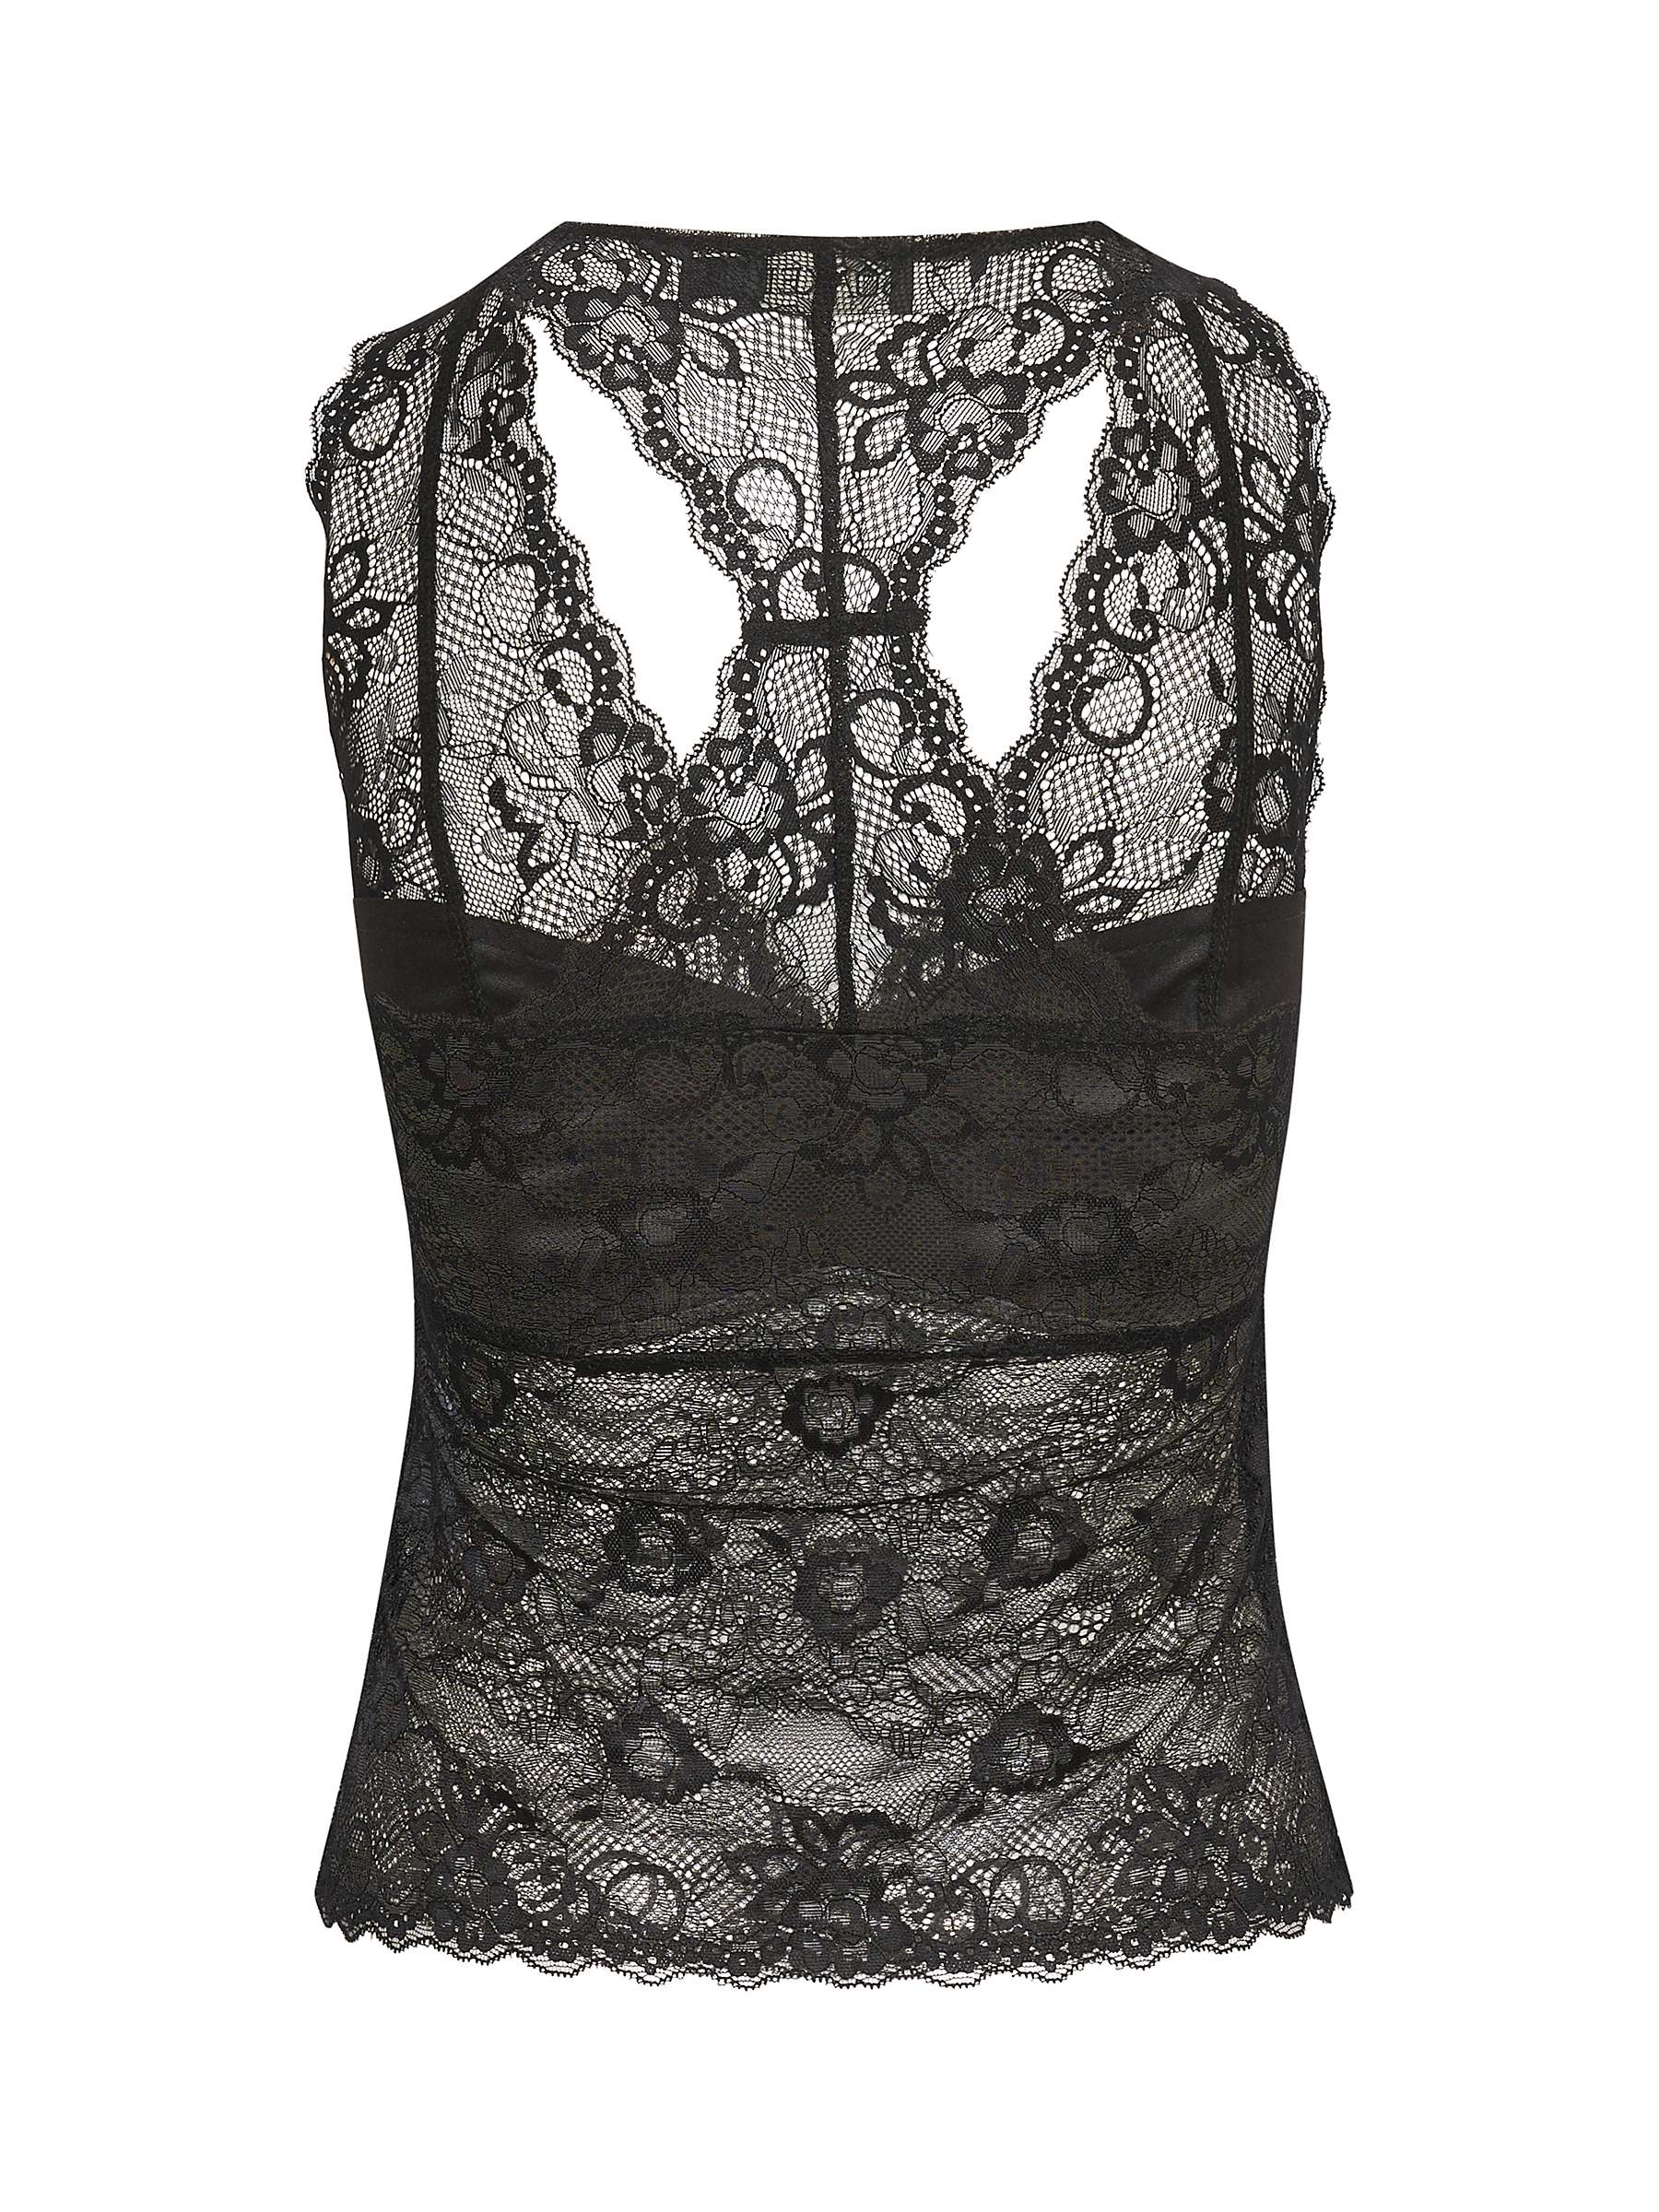 Buy Soaked In Luxury Dolly Lace Top, Black Online at johnlewis.com